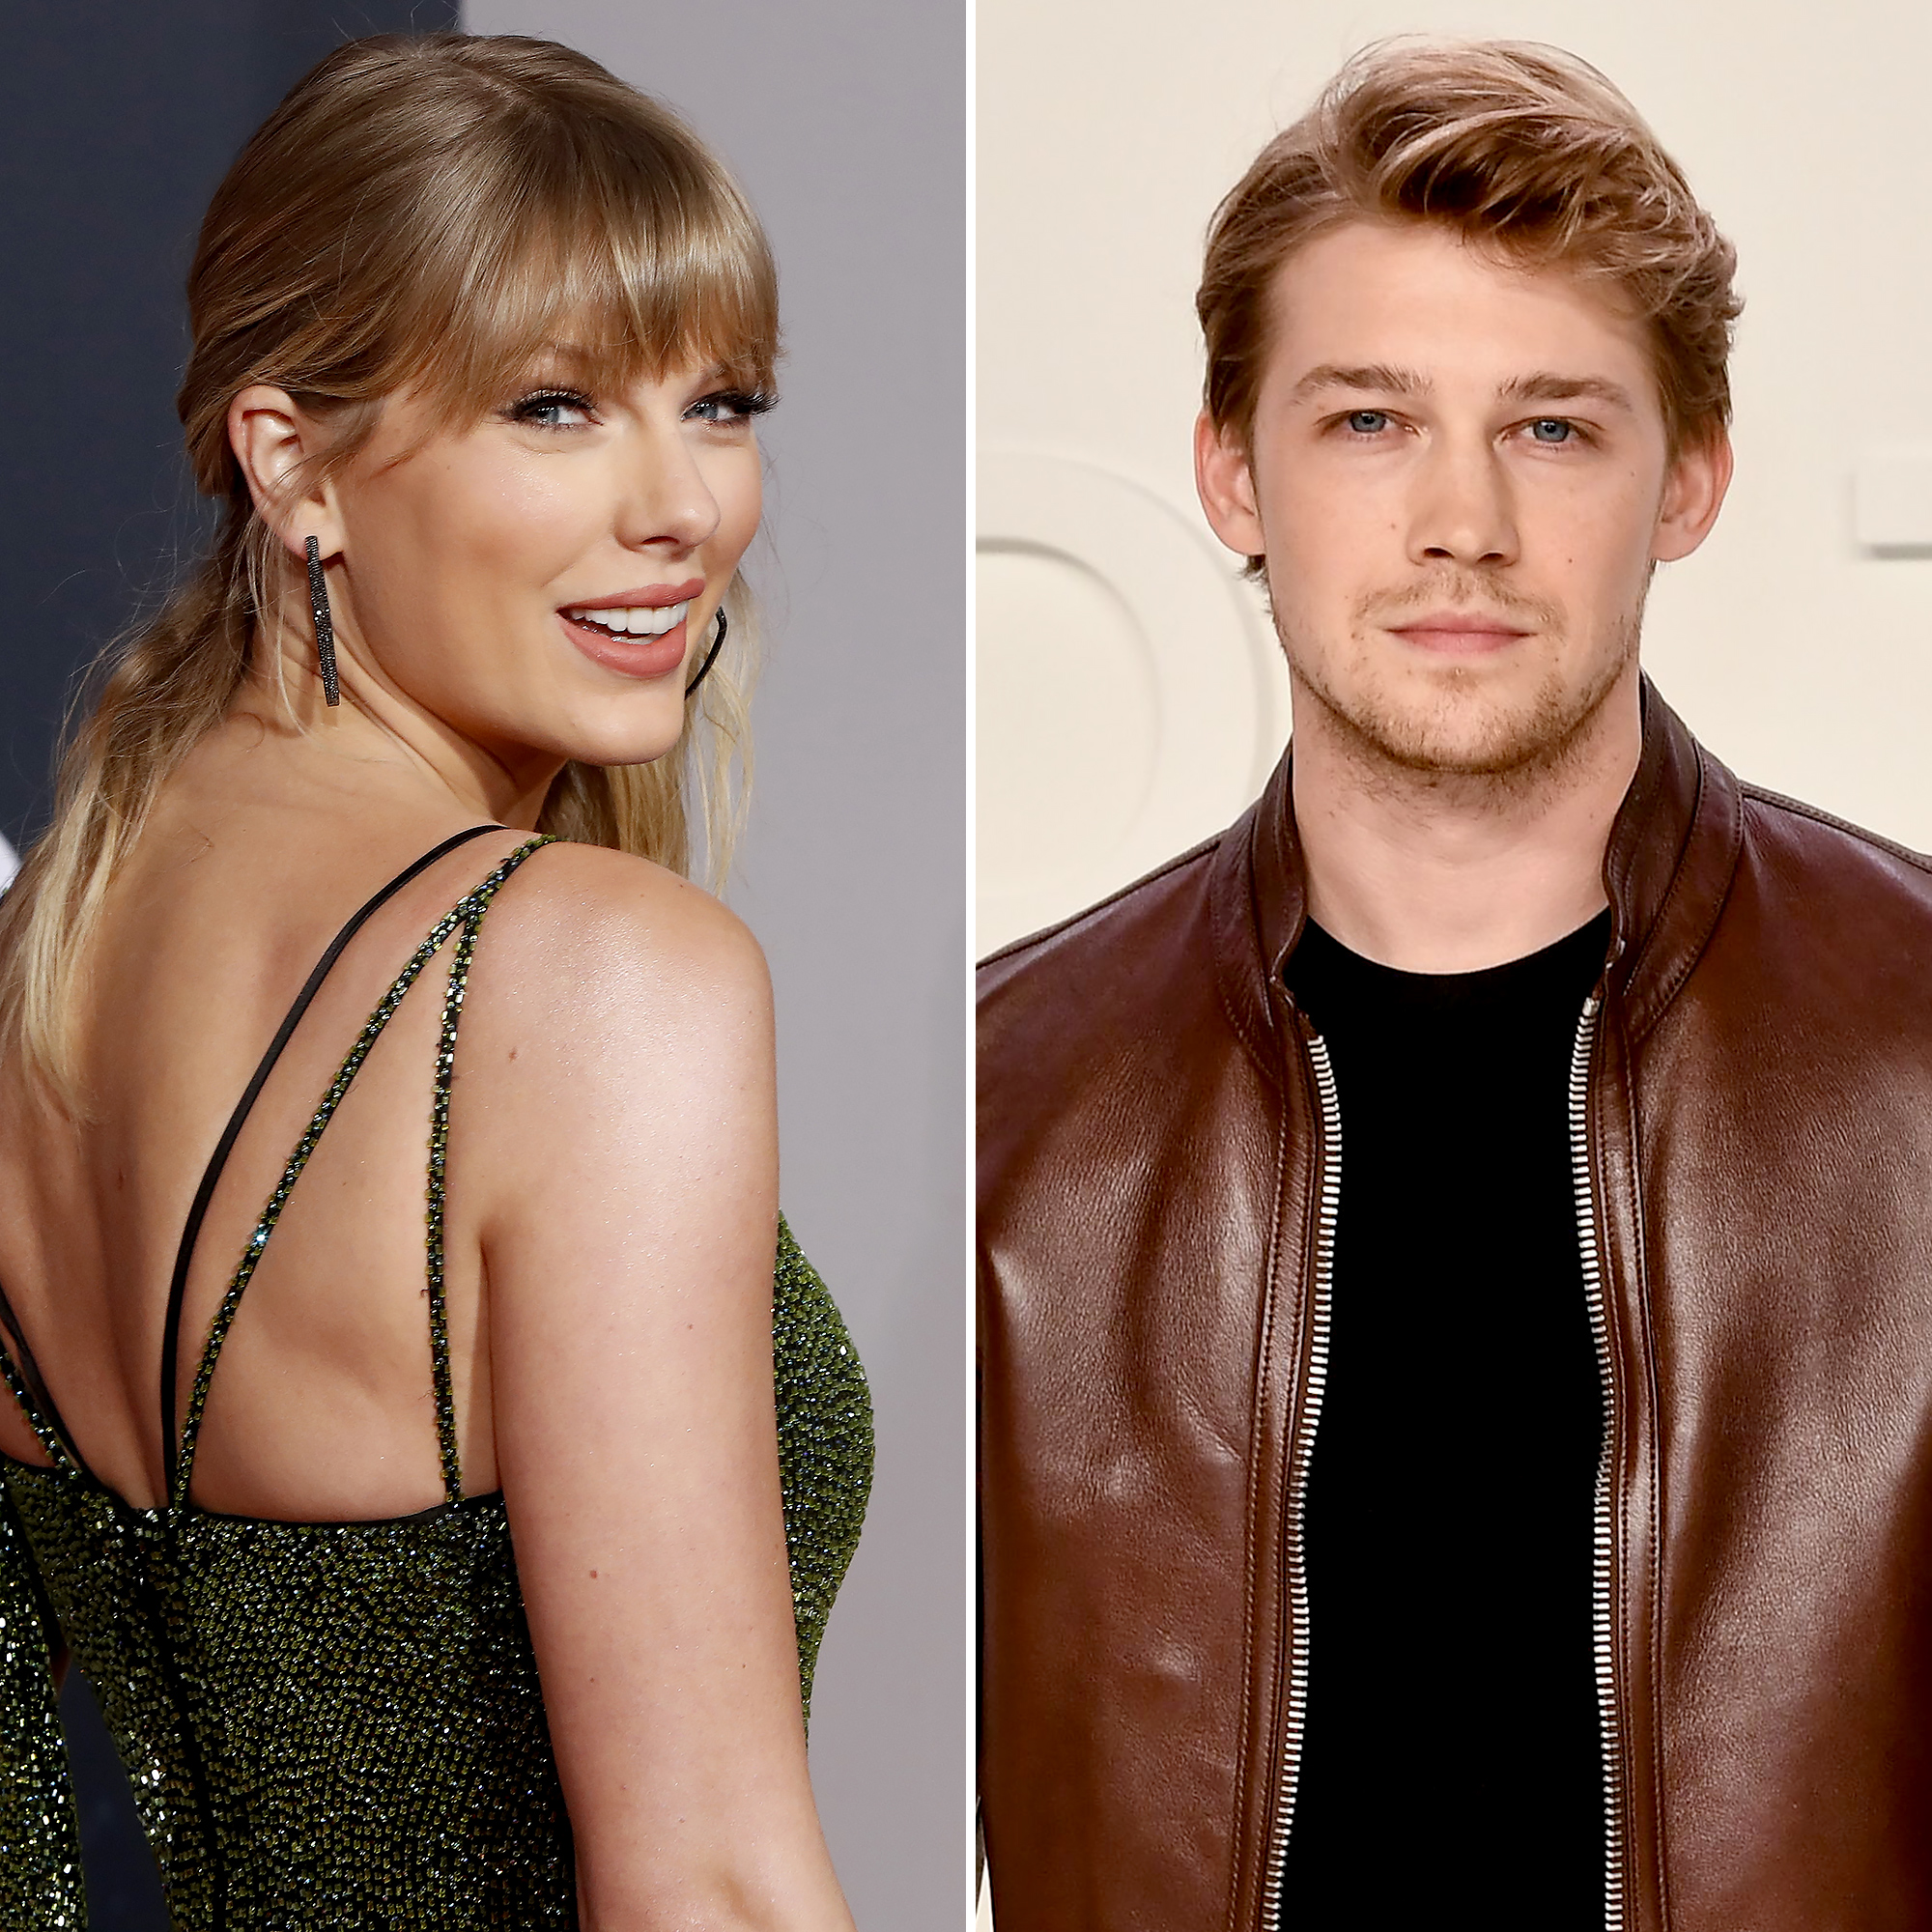 Taylor Swift and Joe Alwyn Have ‘Talked About Their Future and Marriage